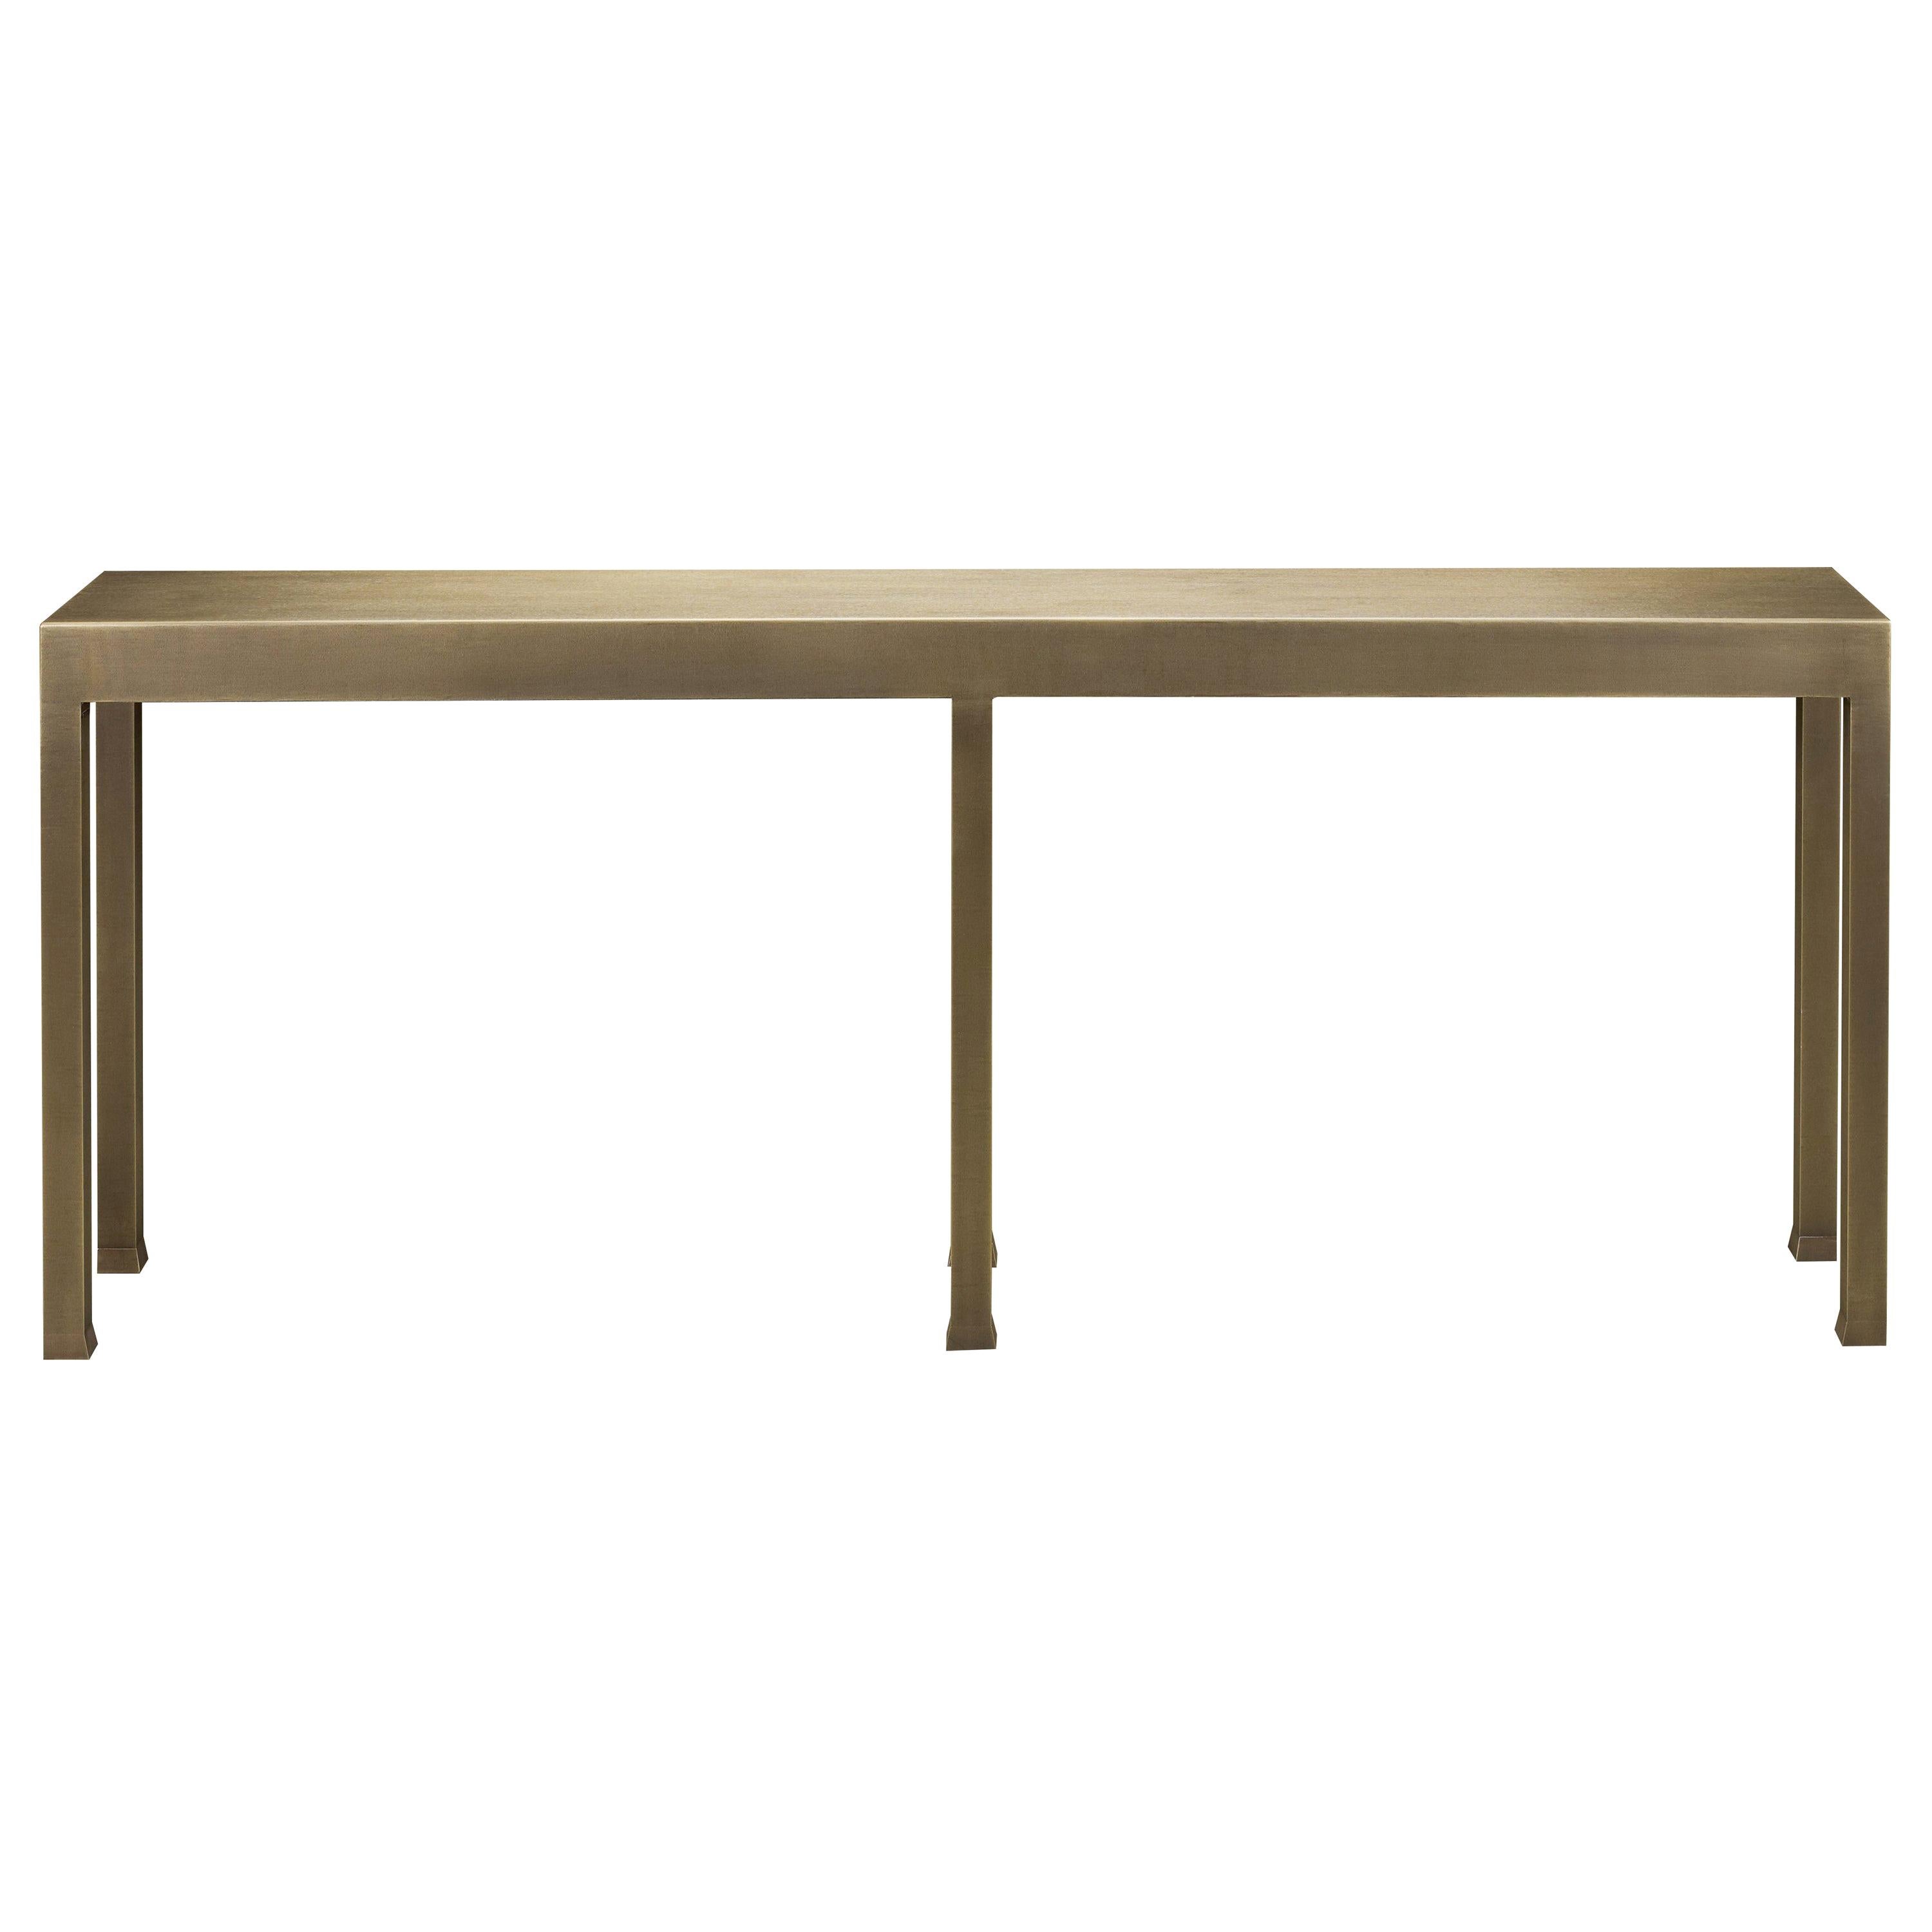 For Sale: Brown (hammered bronze.jpg) Promemoria Gong Console Table in Hammered Bronze by Romeo Sozzi